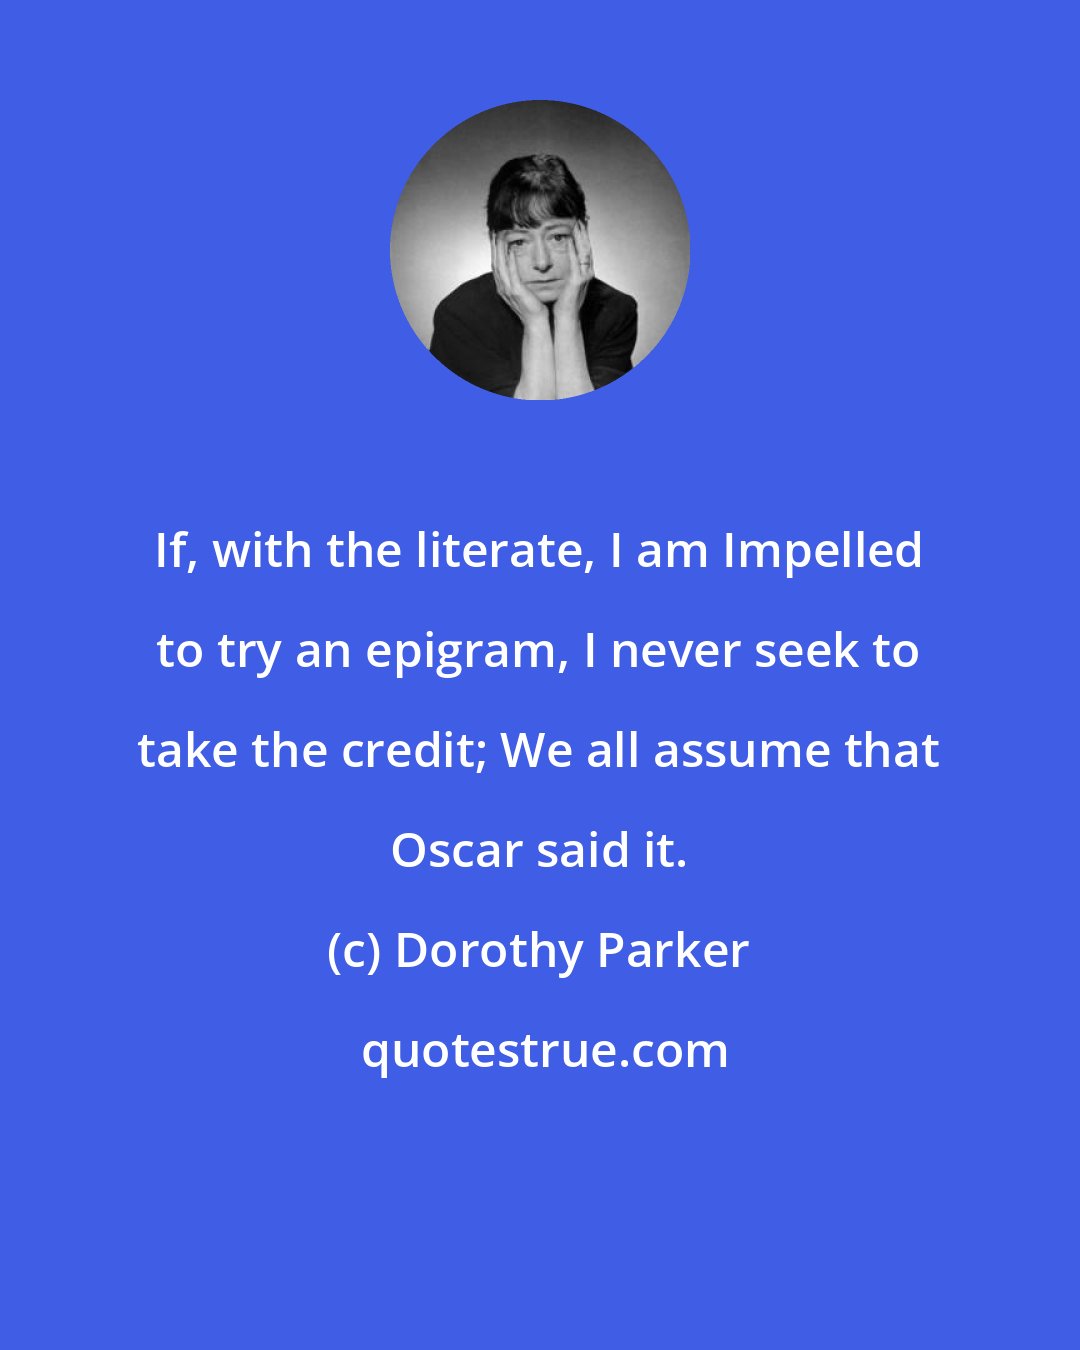 Dorothy Parker: If, with the literate, I am Impelled to try an epigram, I never seek to take the credit; We all assume that Oscar said it.